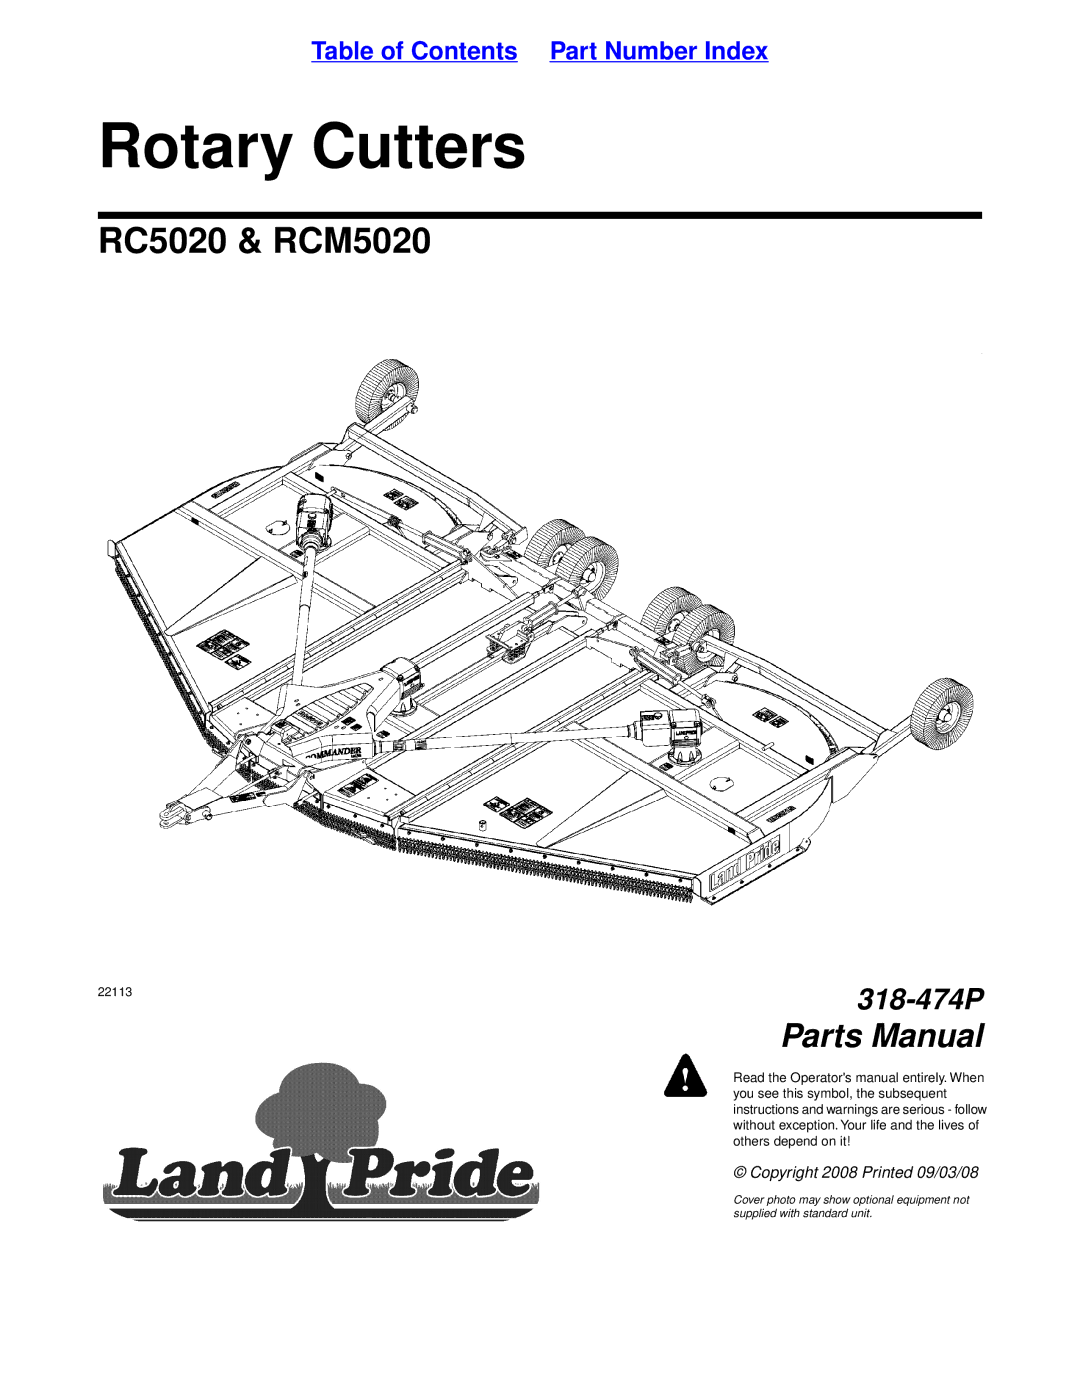 Land Pride RC5020 manual Rotary Cutters 